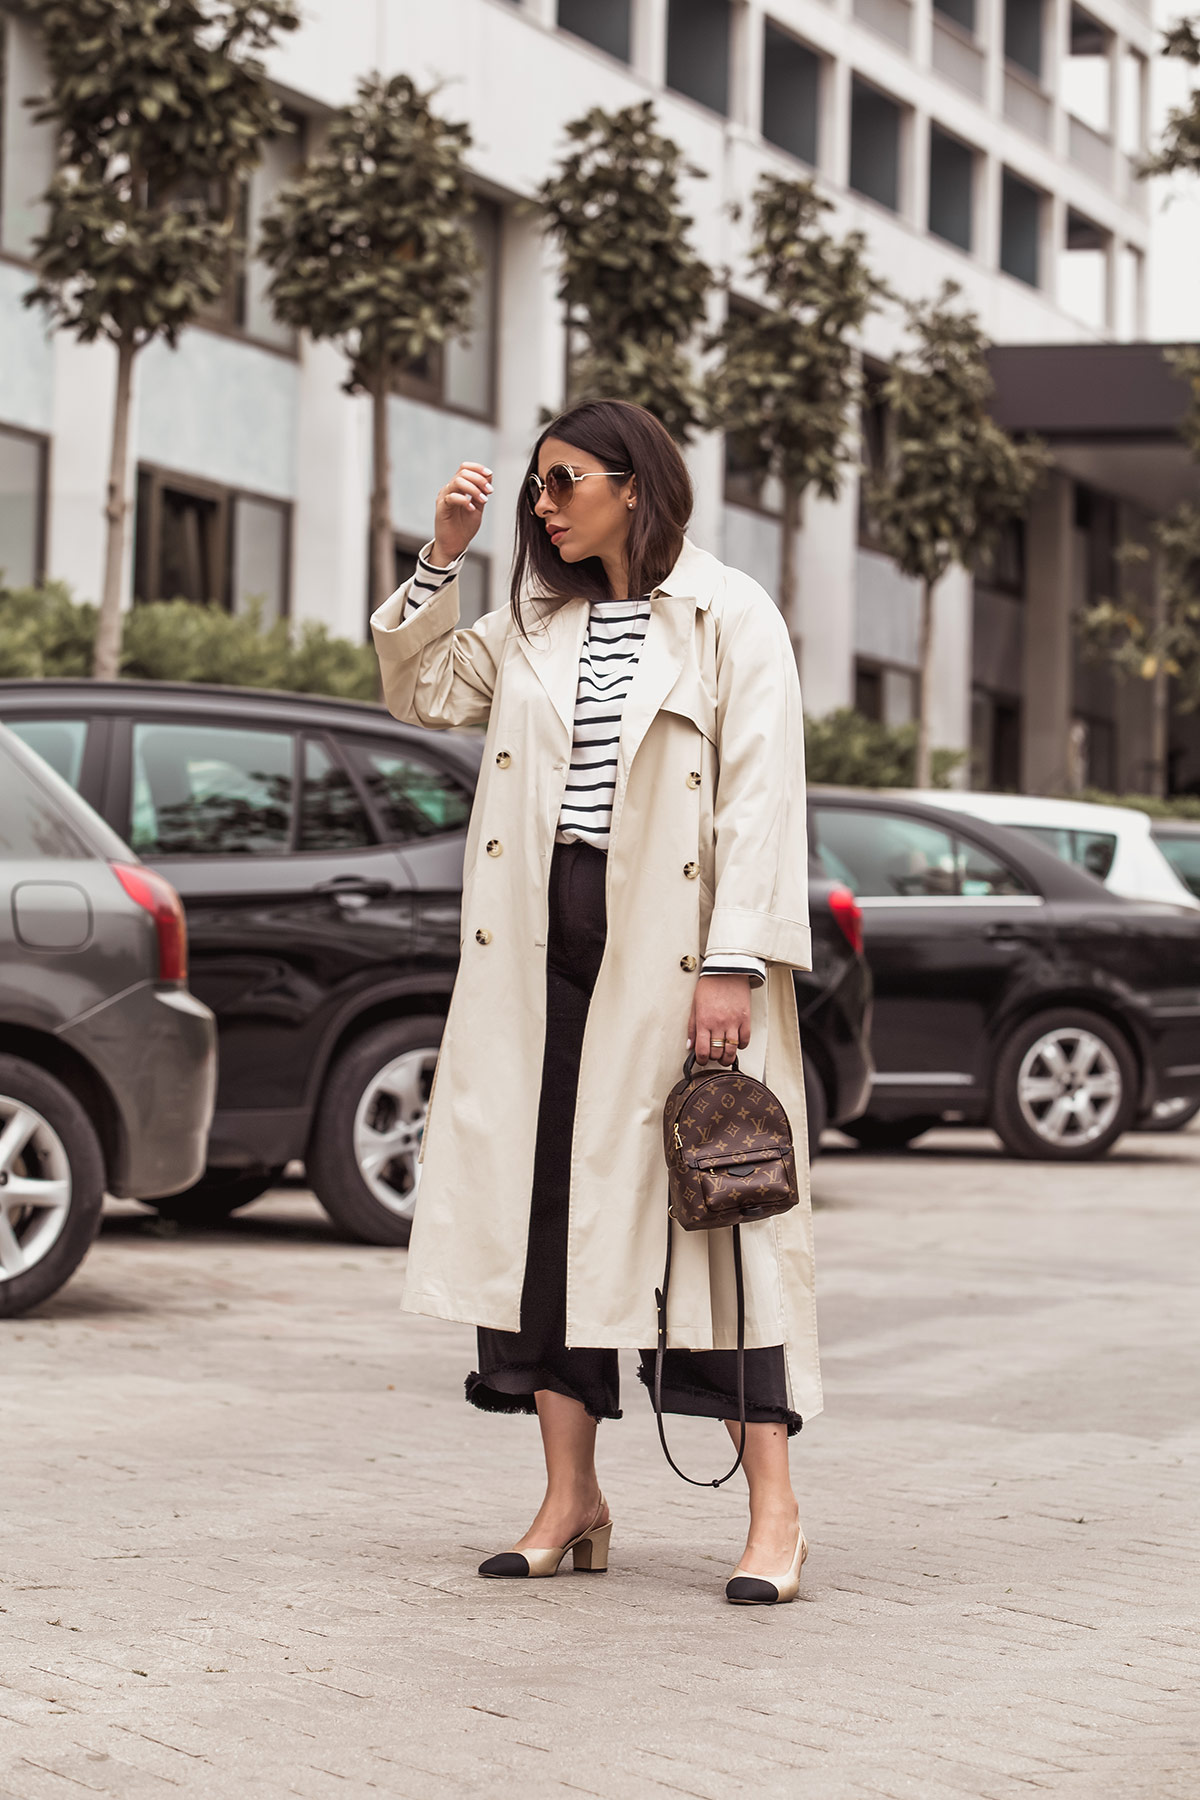 Stella Asteria wearing classic look with beige trench coat, breton top, Louis Vuitton Palm Springs backpack as a cross body, black denim culottes, Chanel slingbacks and Chloe Carlina sunglasses